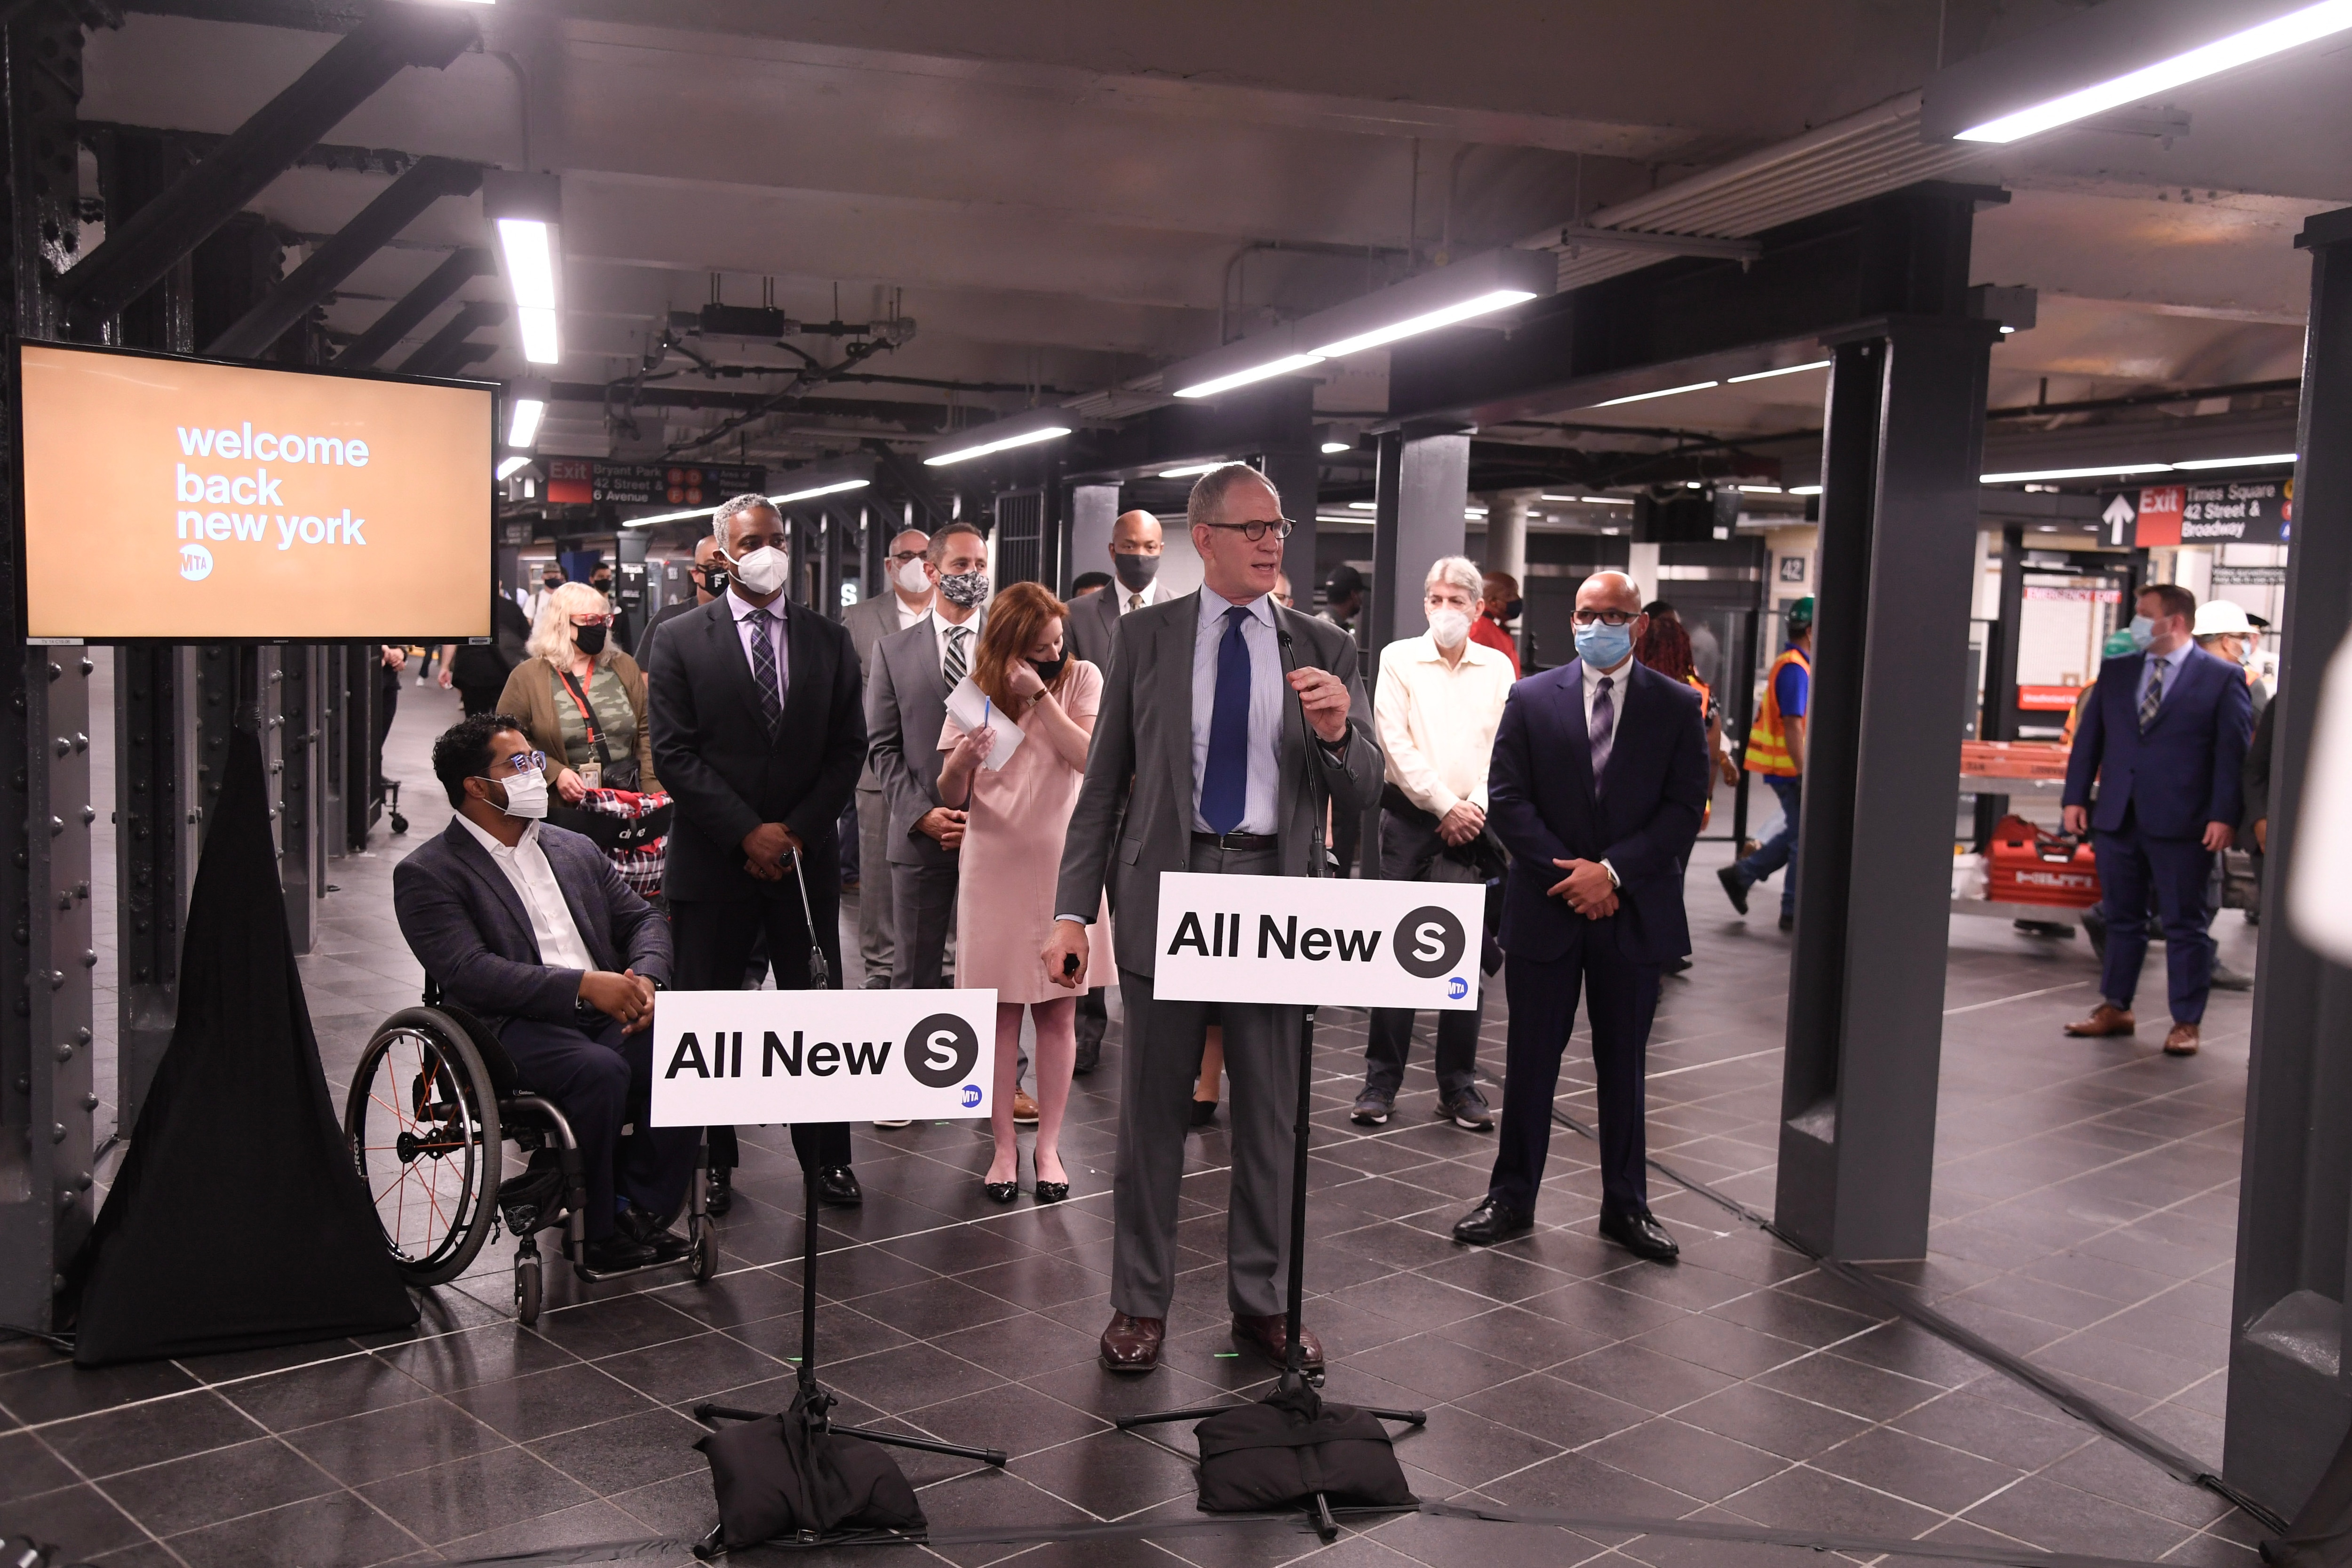 MTA Launches Welcome Back Campaign at Event Marking Opening of Brand New 42 Street Shuttle